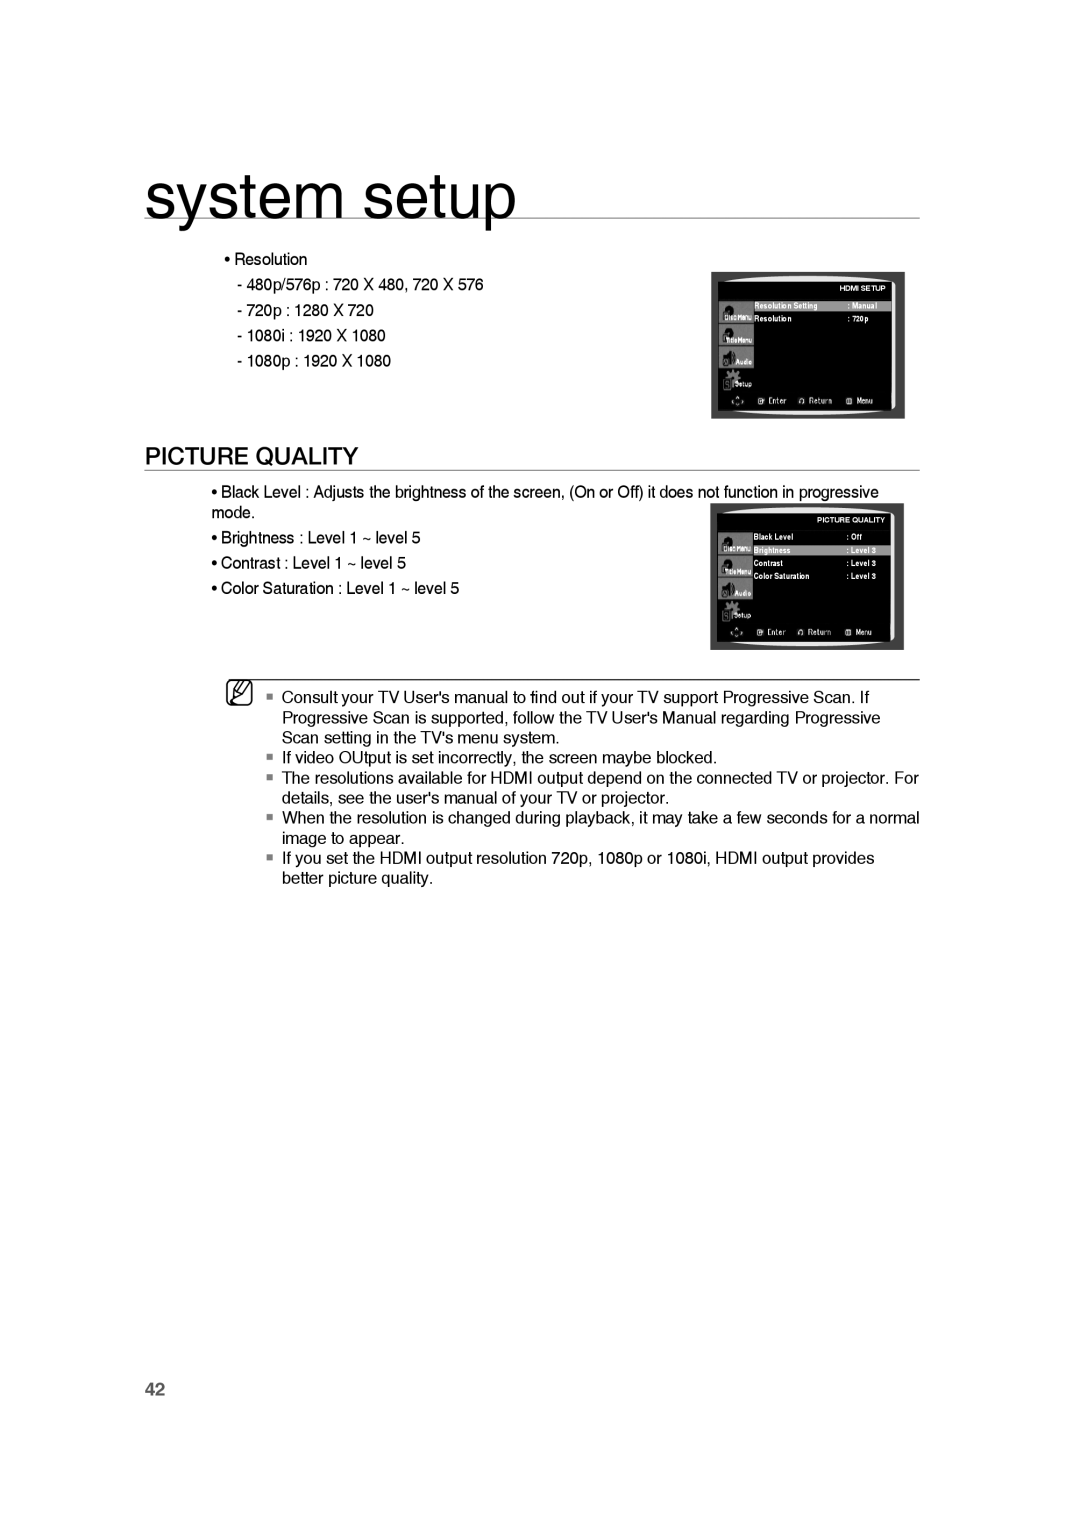 Samsung HE10T user manual Picture Quality, system setup 